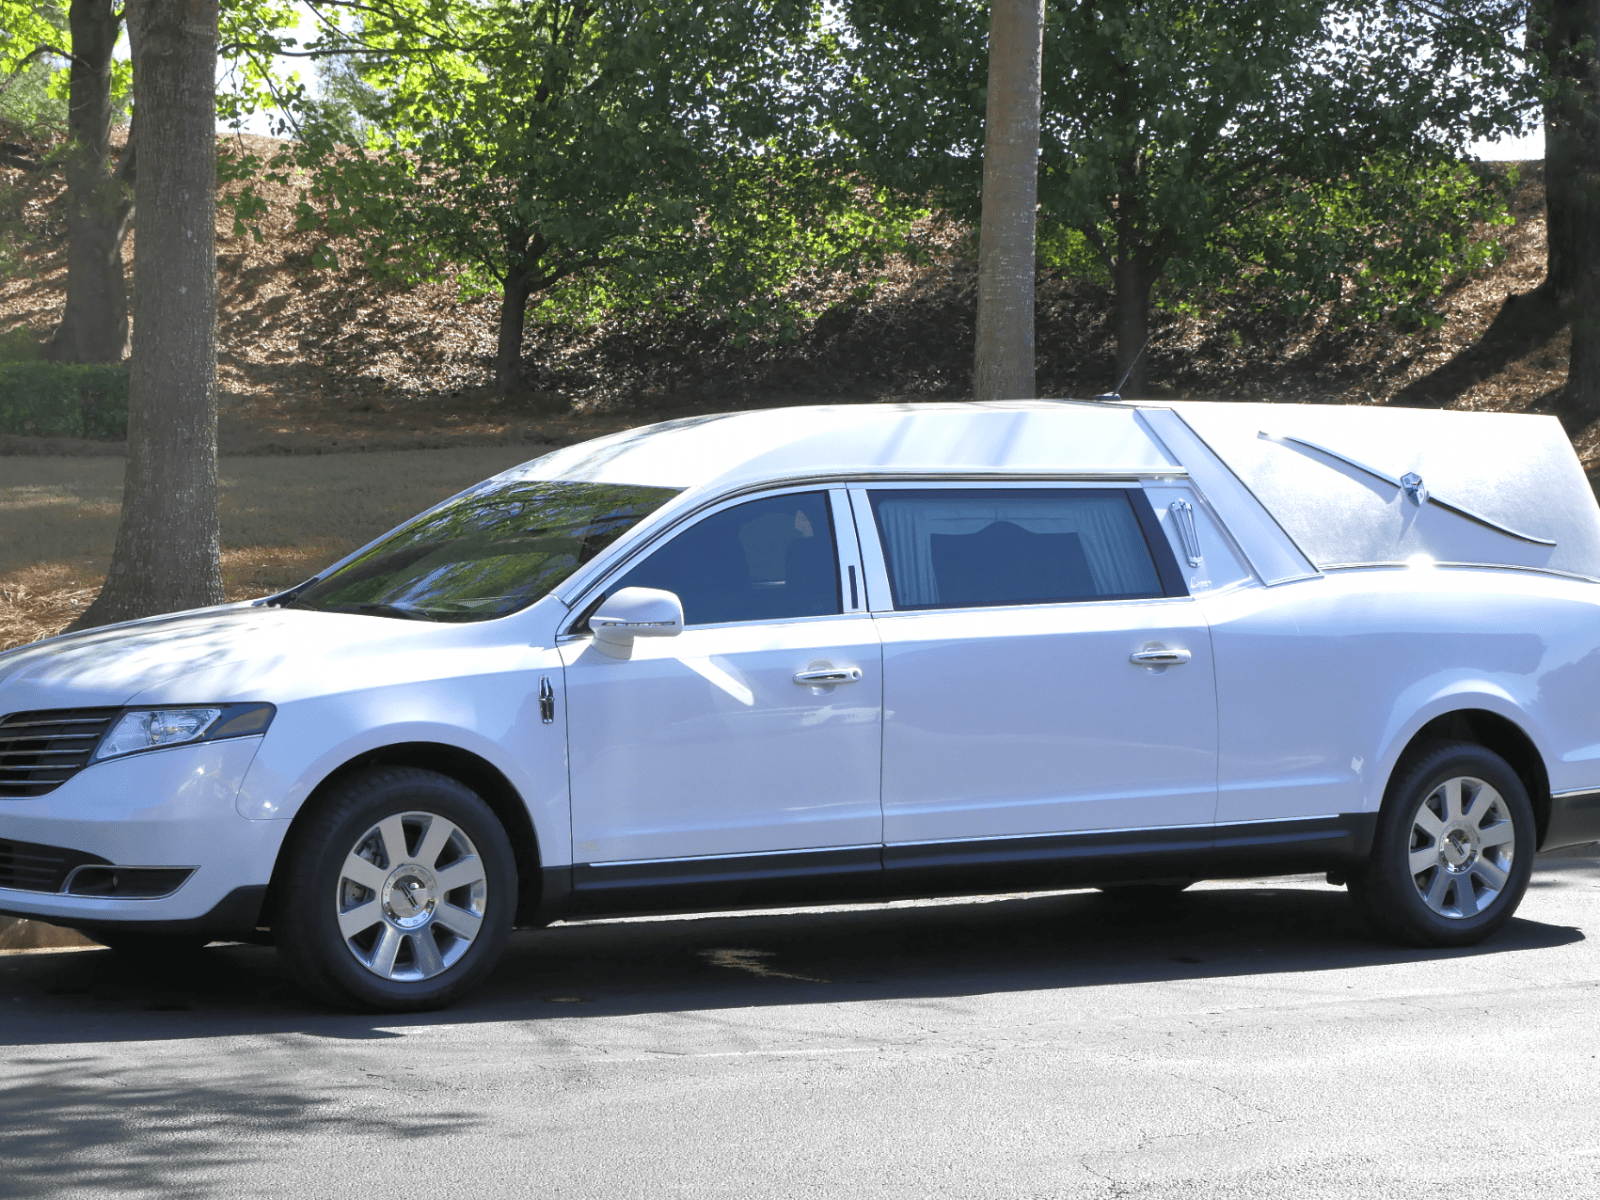 Lincoln Hearse Models: Which One Should You Choose?